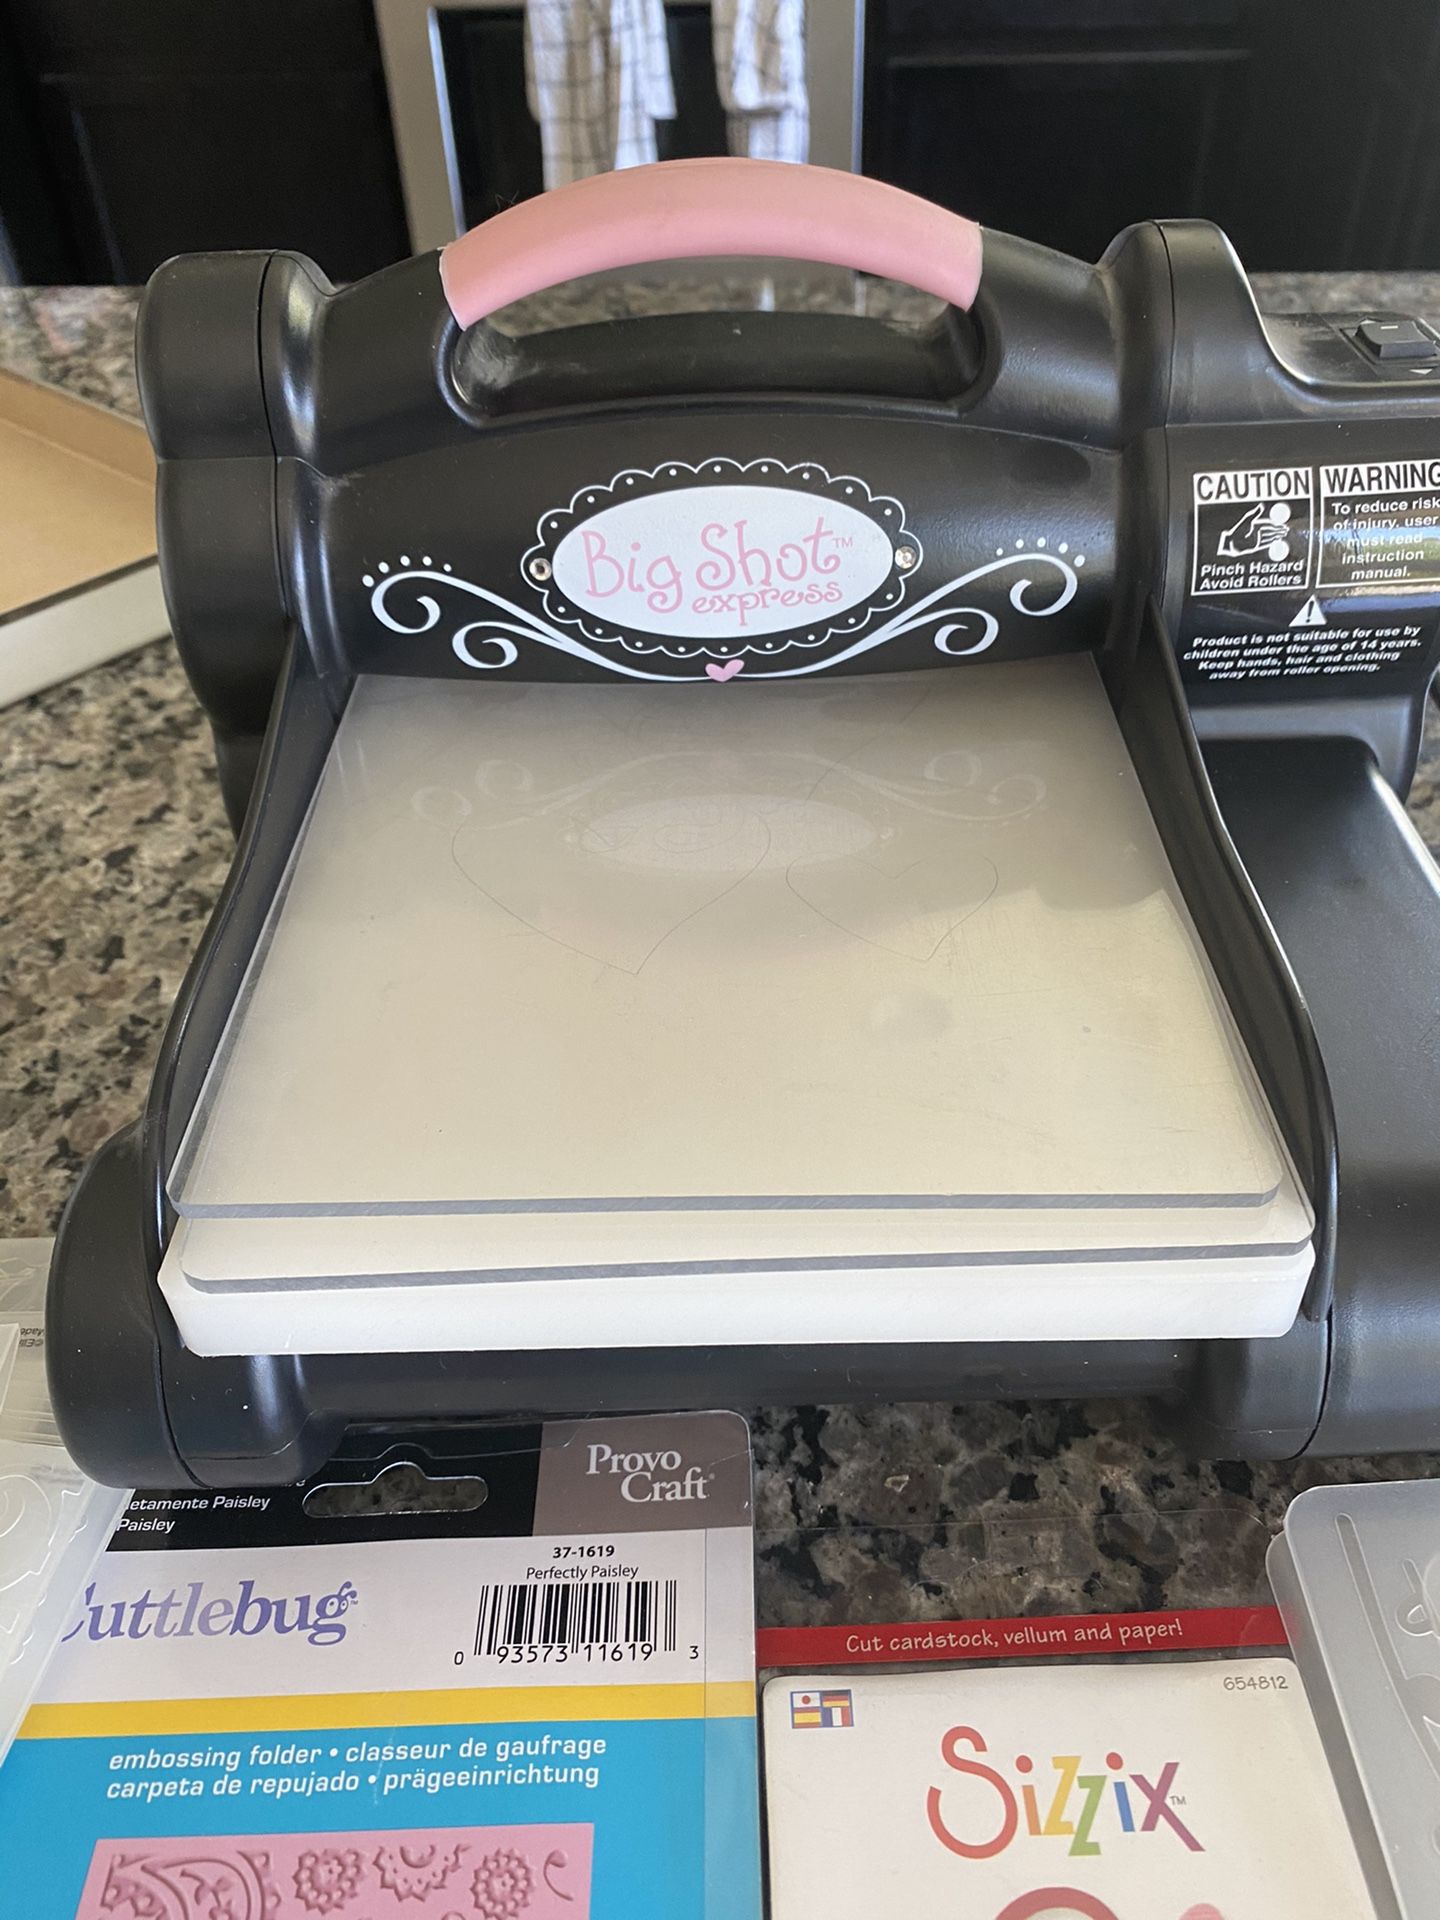 Sizzix electric embossing machine with extras